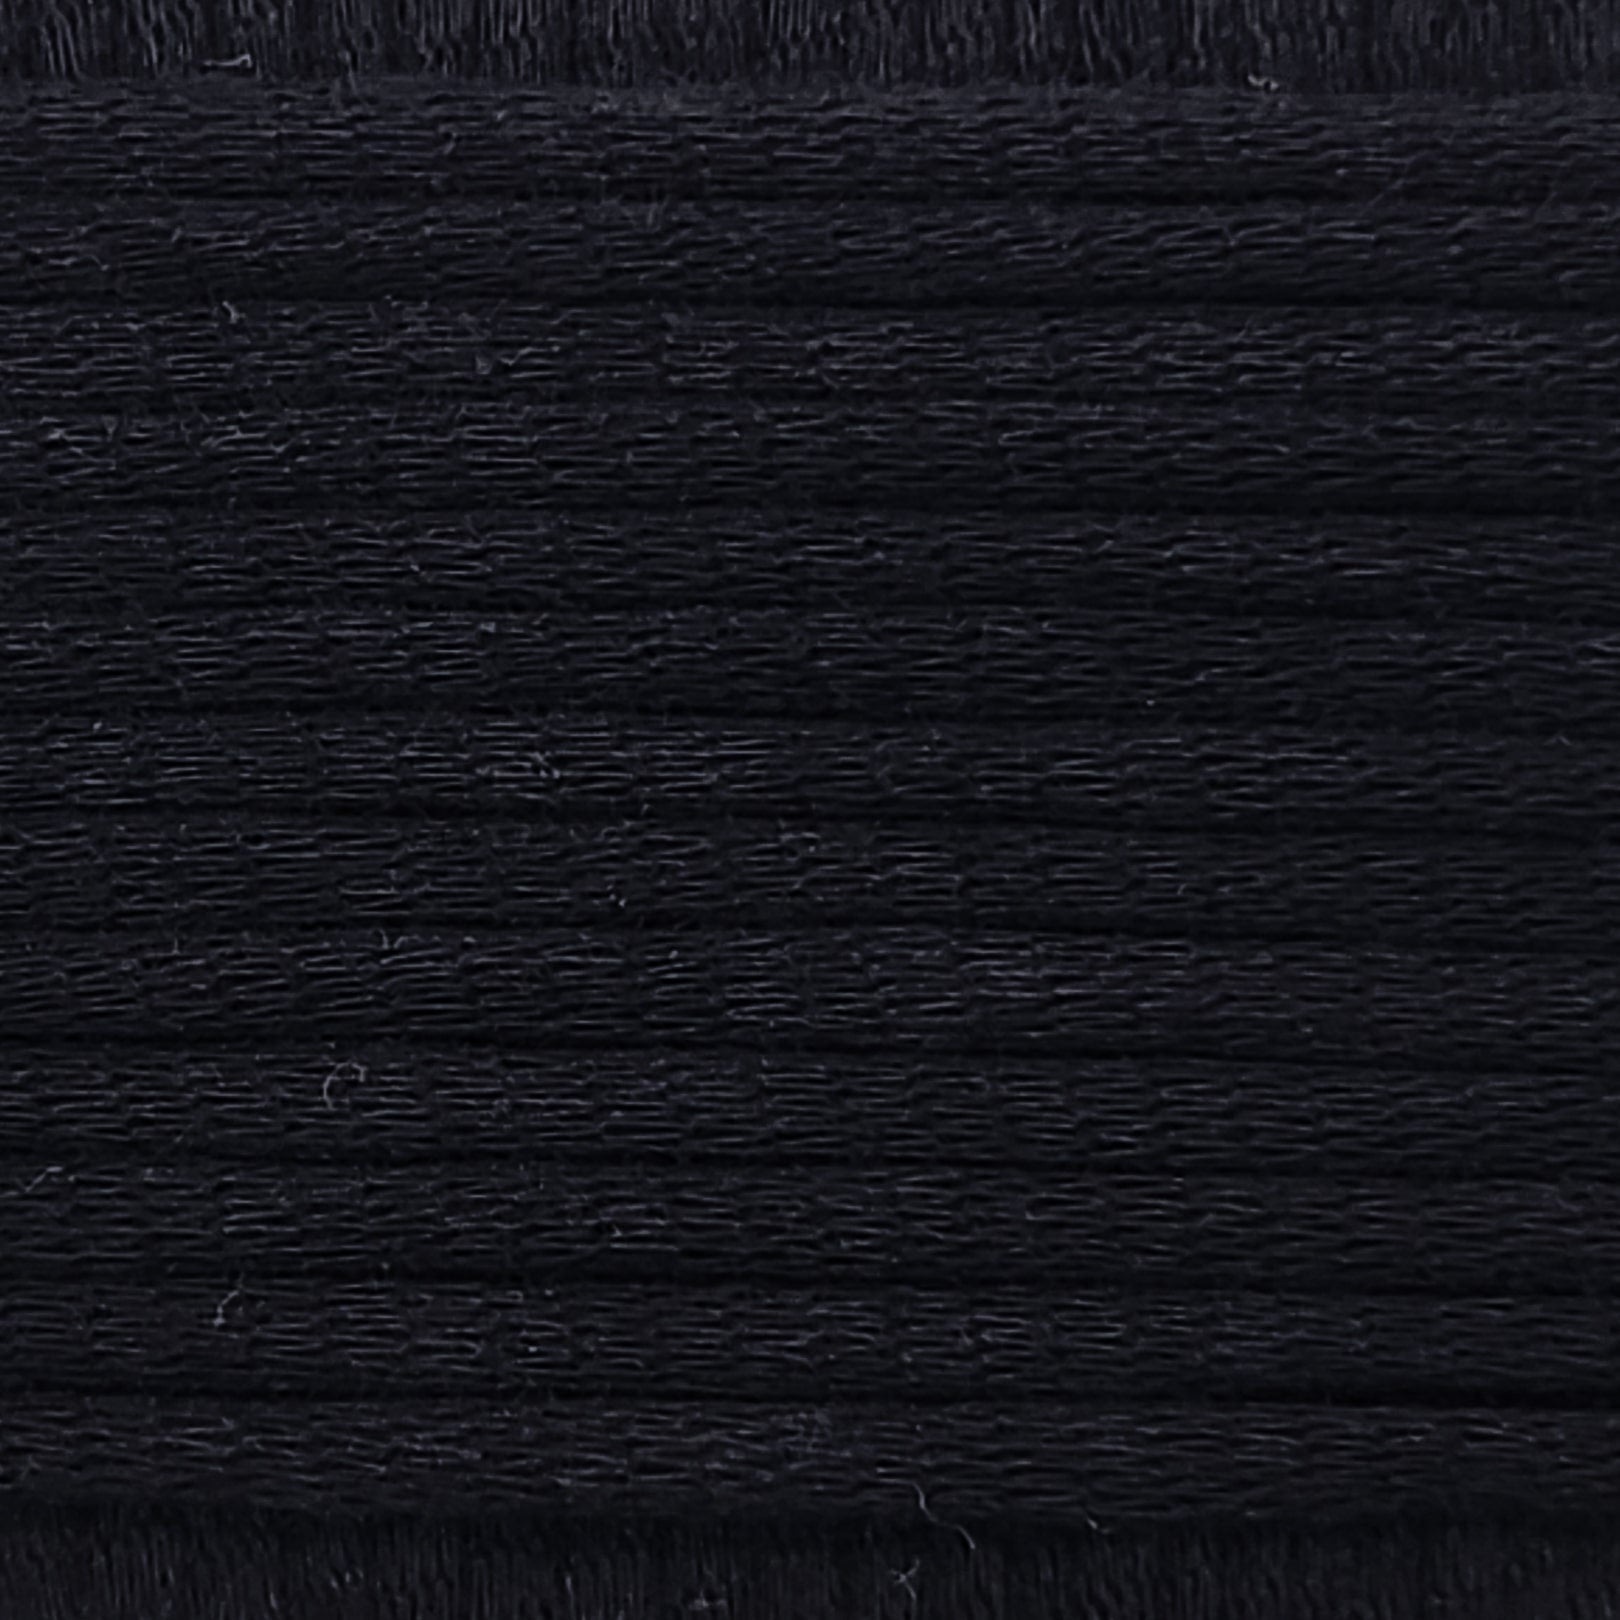 A close-up image showing the texture of a deep black coloured yarn that is friendly for crochet beginners.